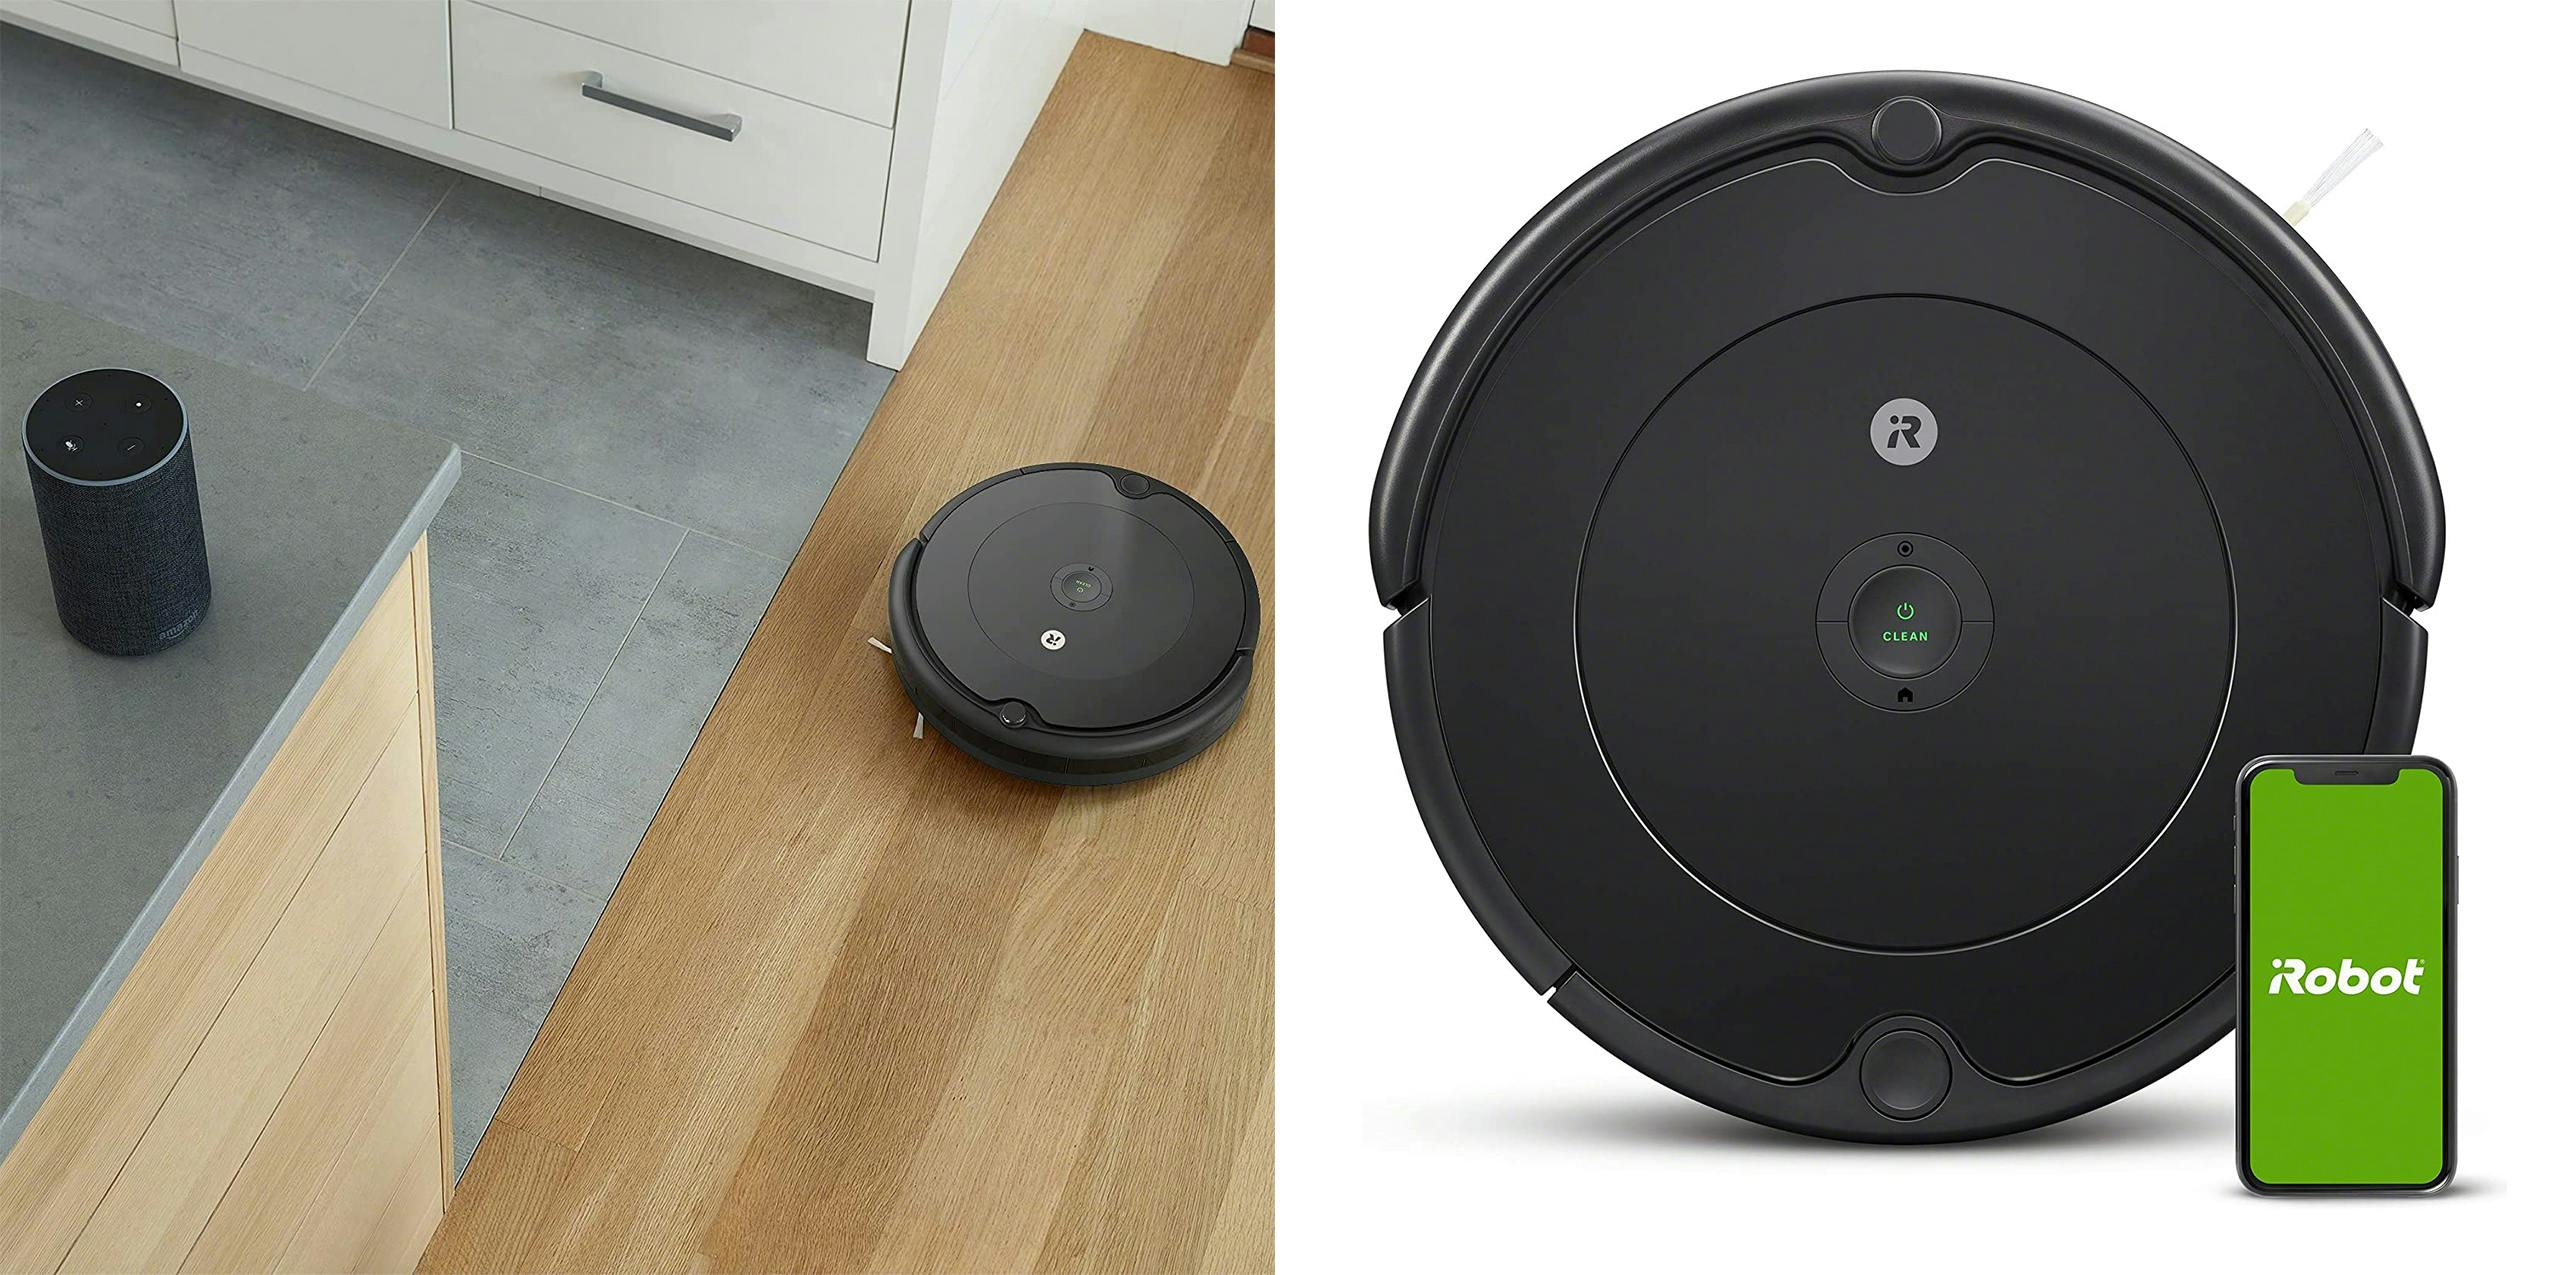 Roomba sweeping a wooden floor with an Alexa device on a counter.